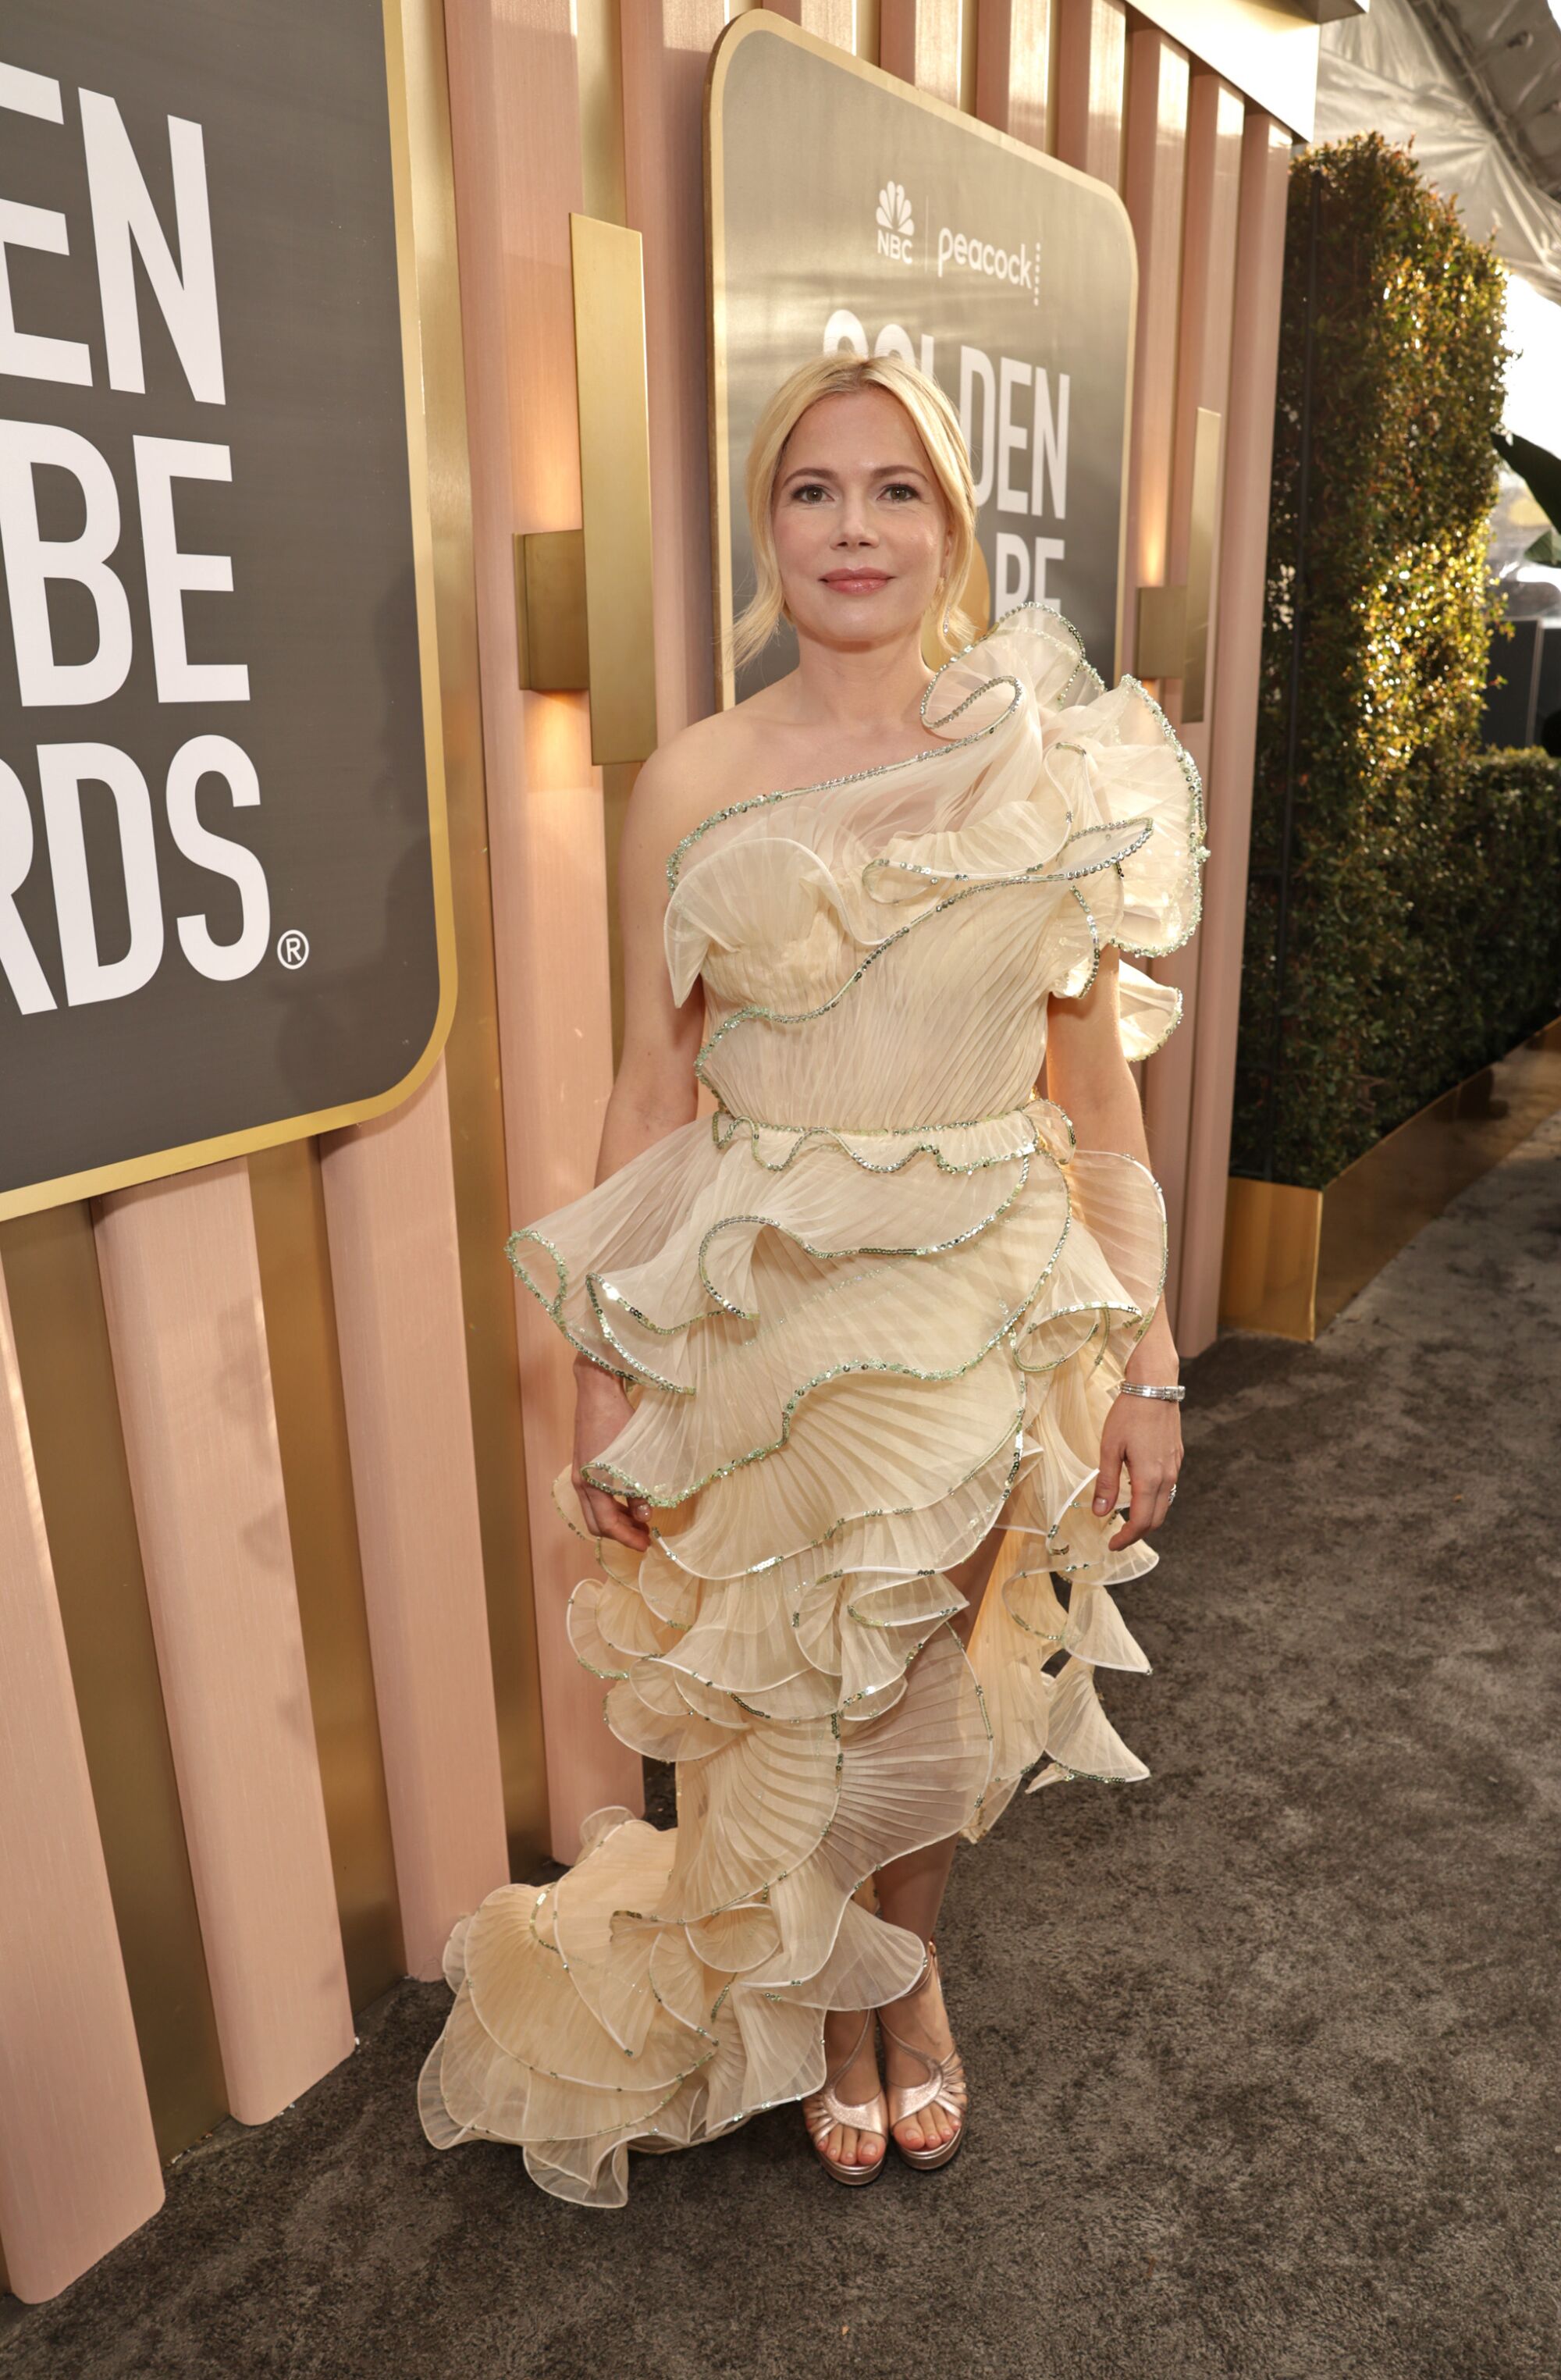 Michelle Williams stuns in this ruffled gown.